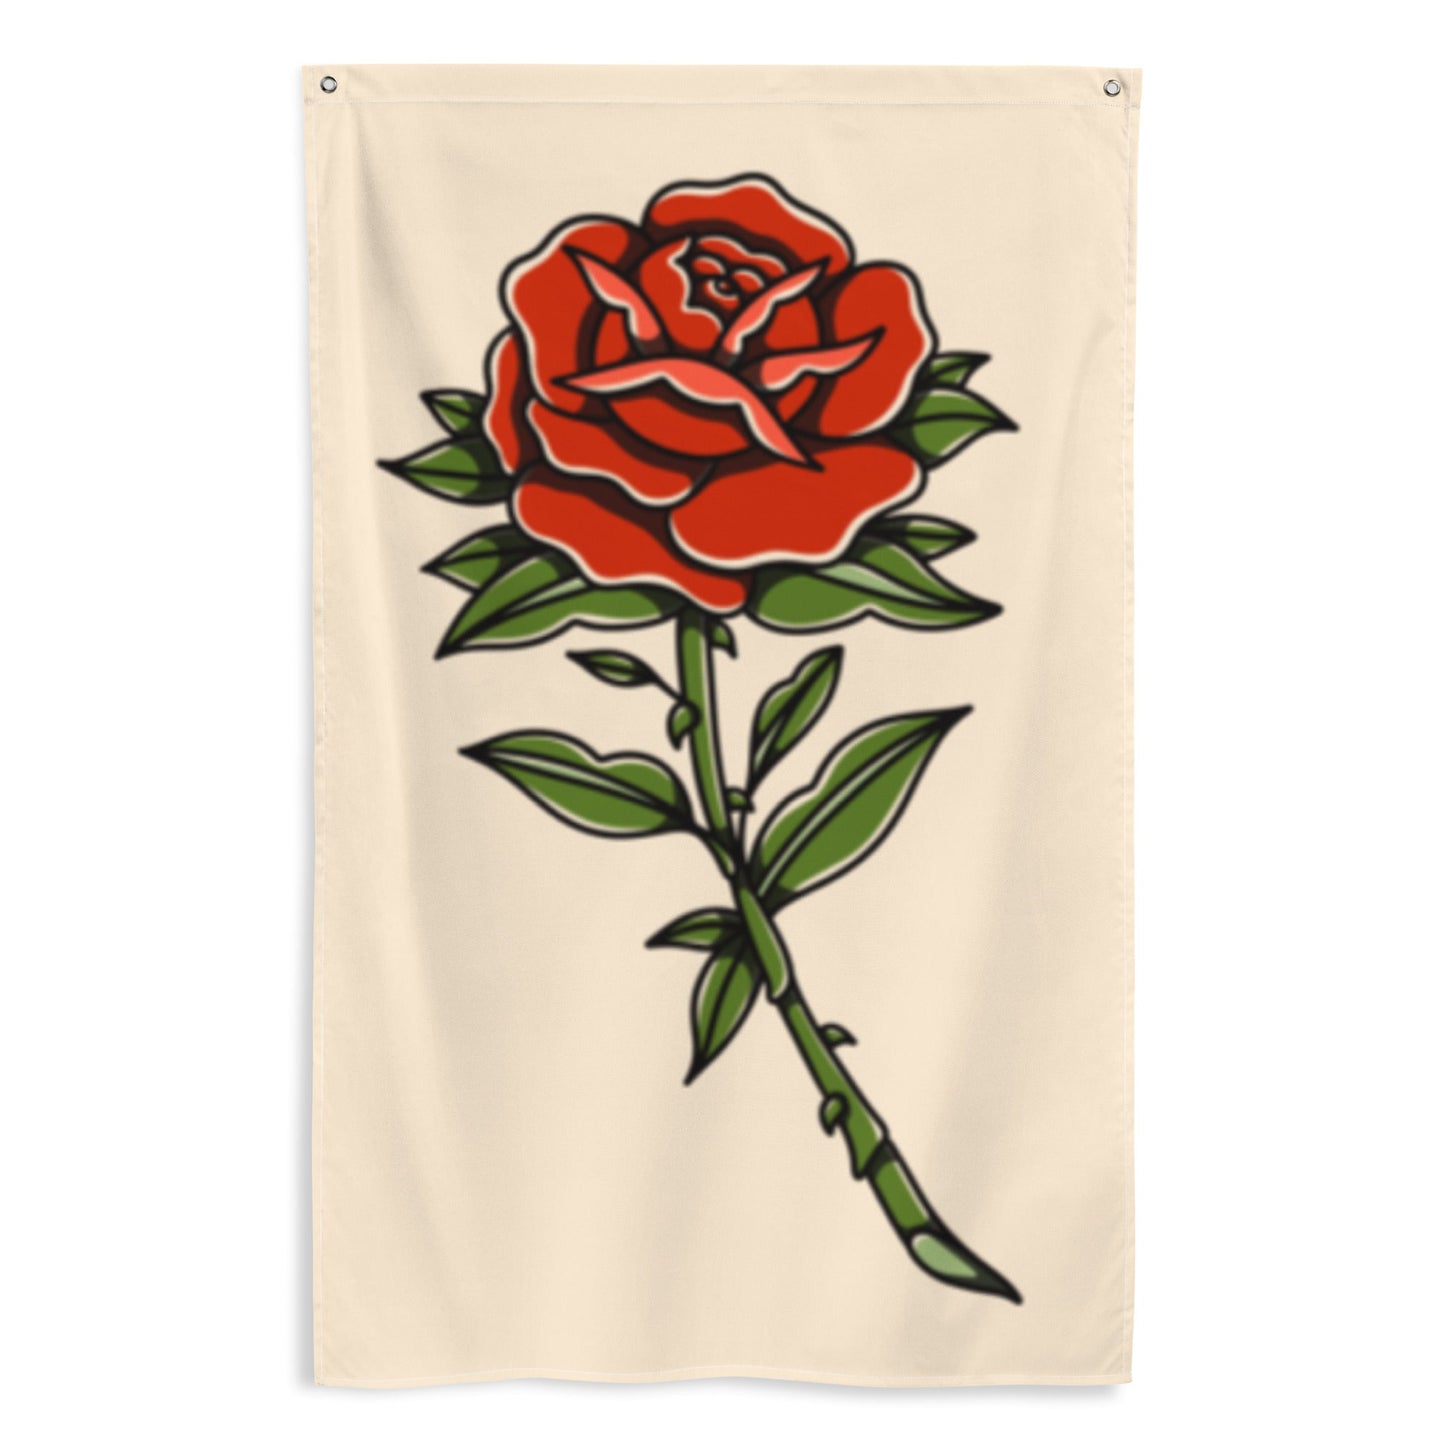 Single Rosy Flag Red